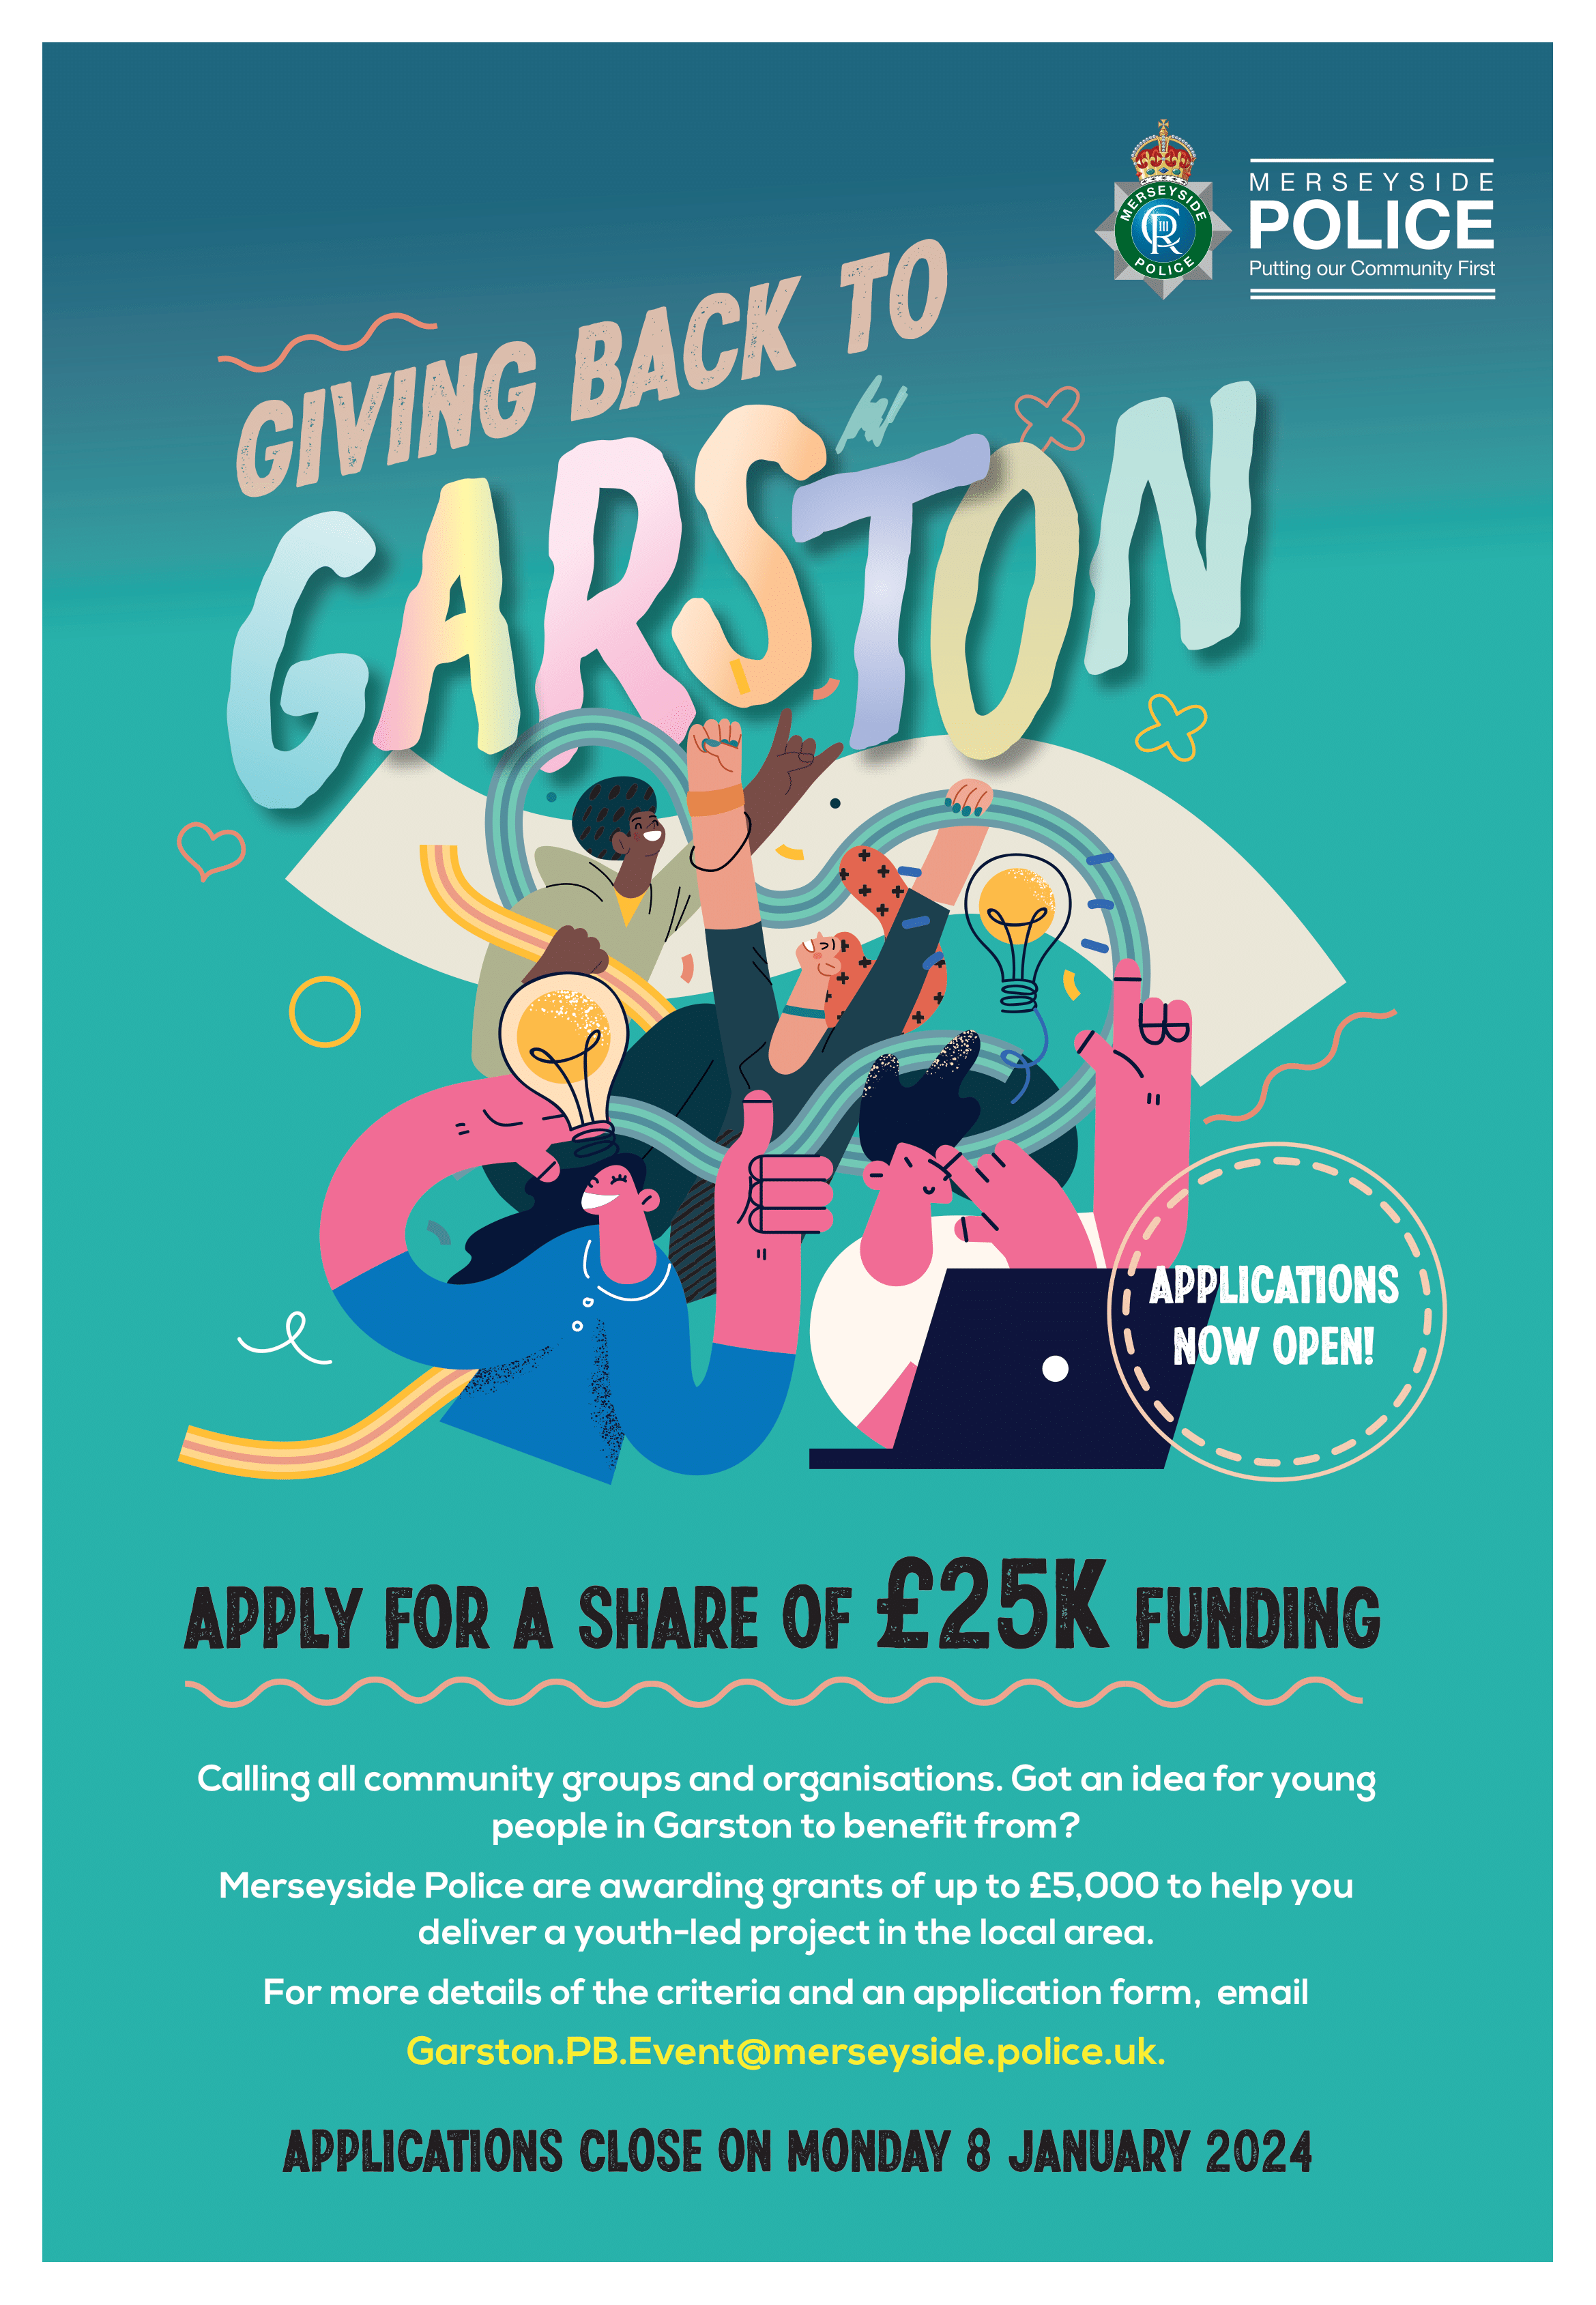 'Giving back to Garston' poster